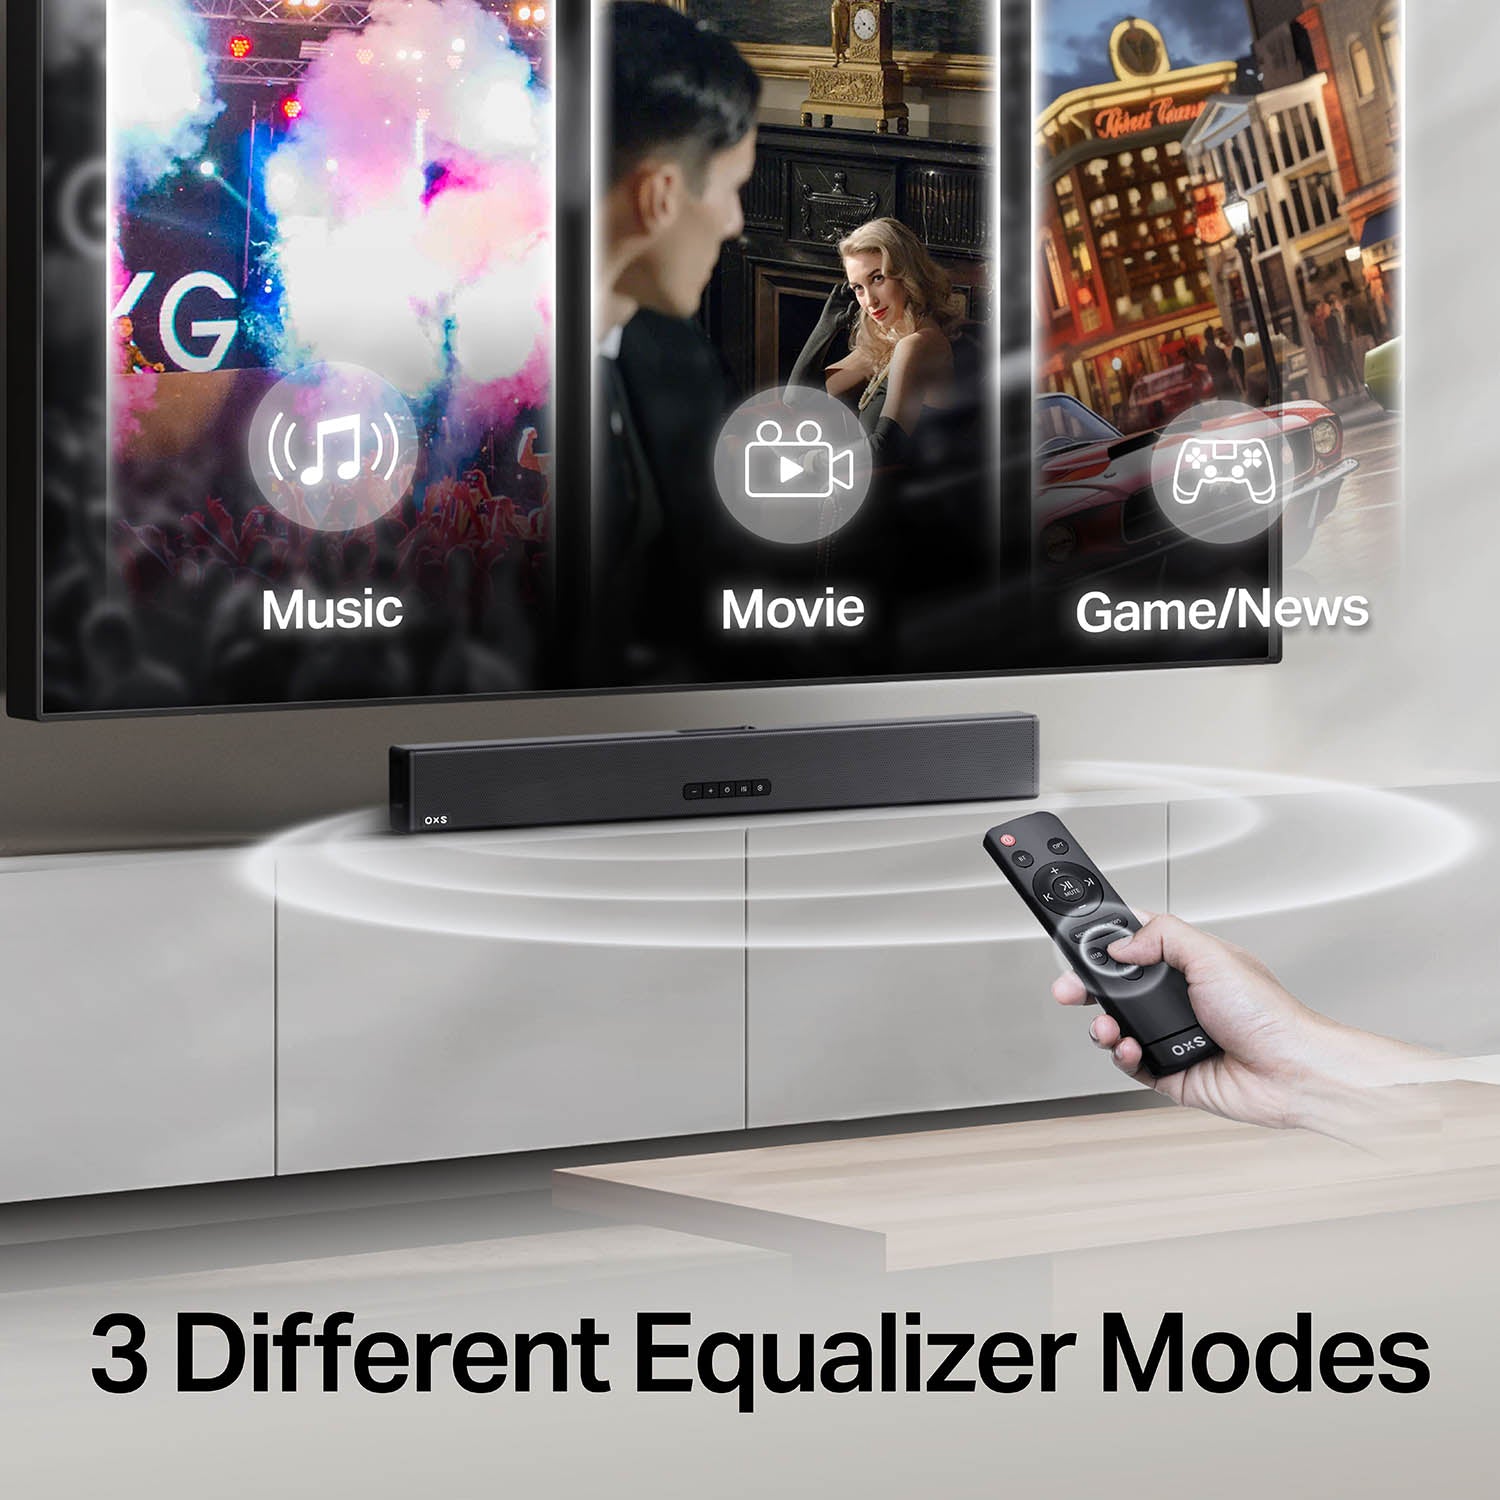 OXS S3 home audio soundbar can improve TV sound with multiple preset EQ settings, to get you High quality musics and get extreme gaming experiences